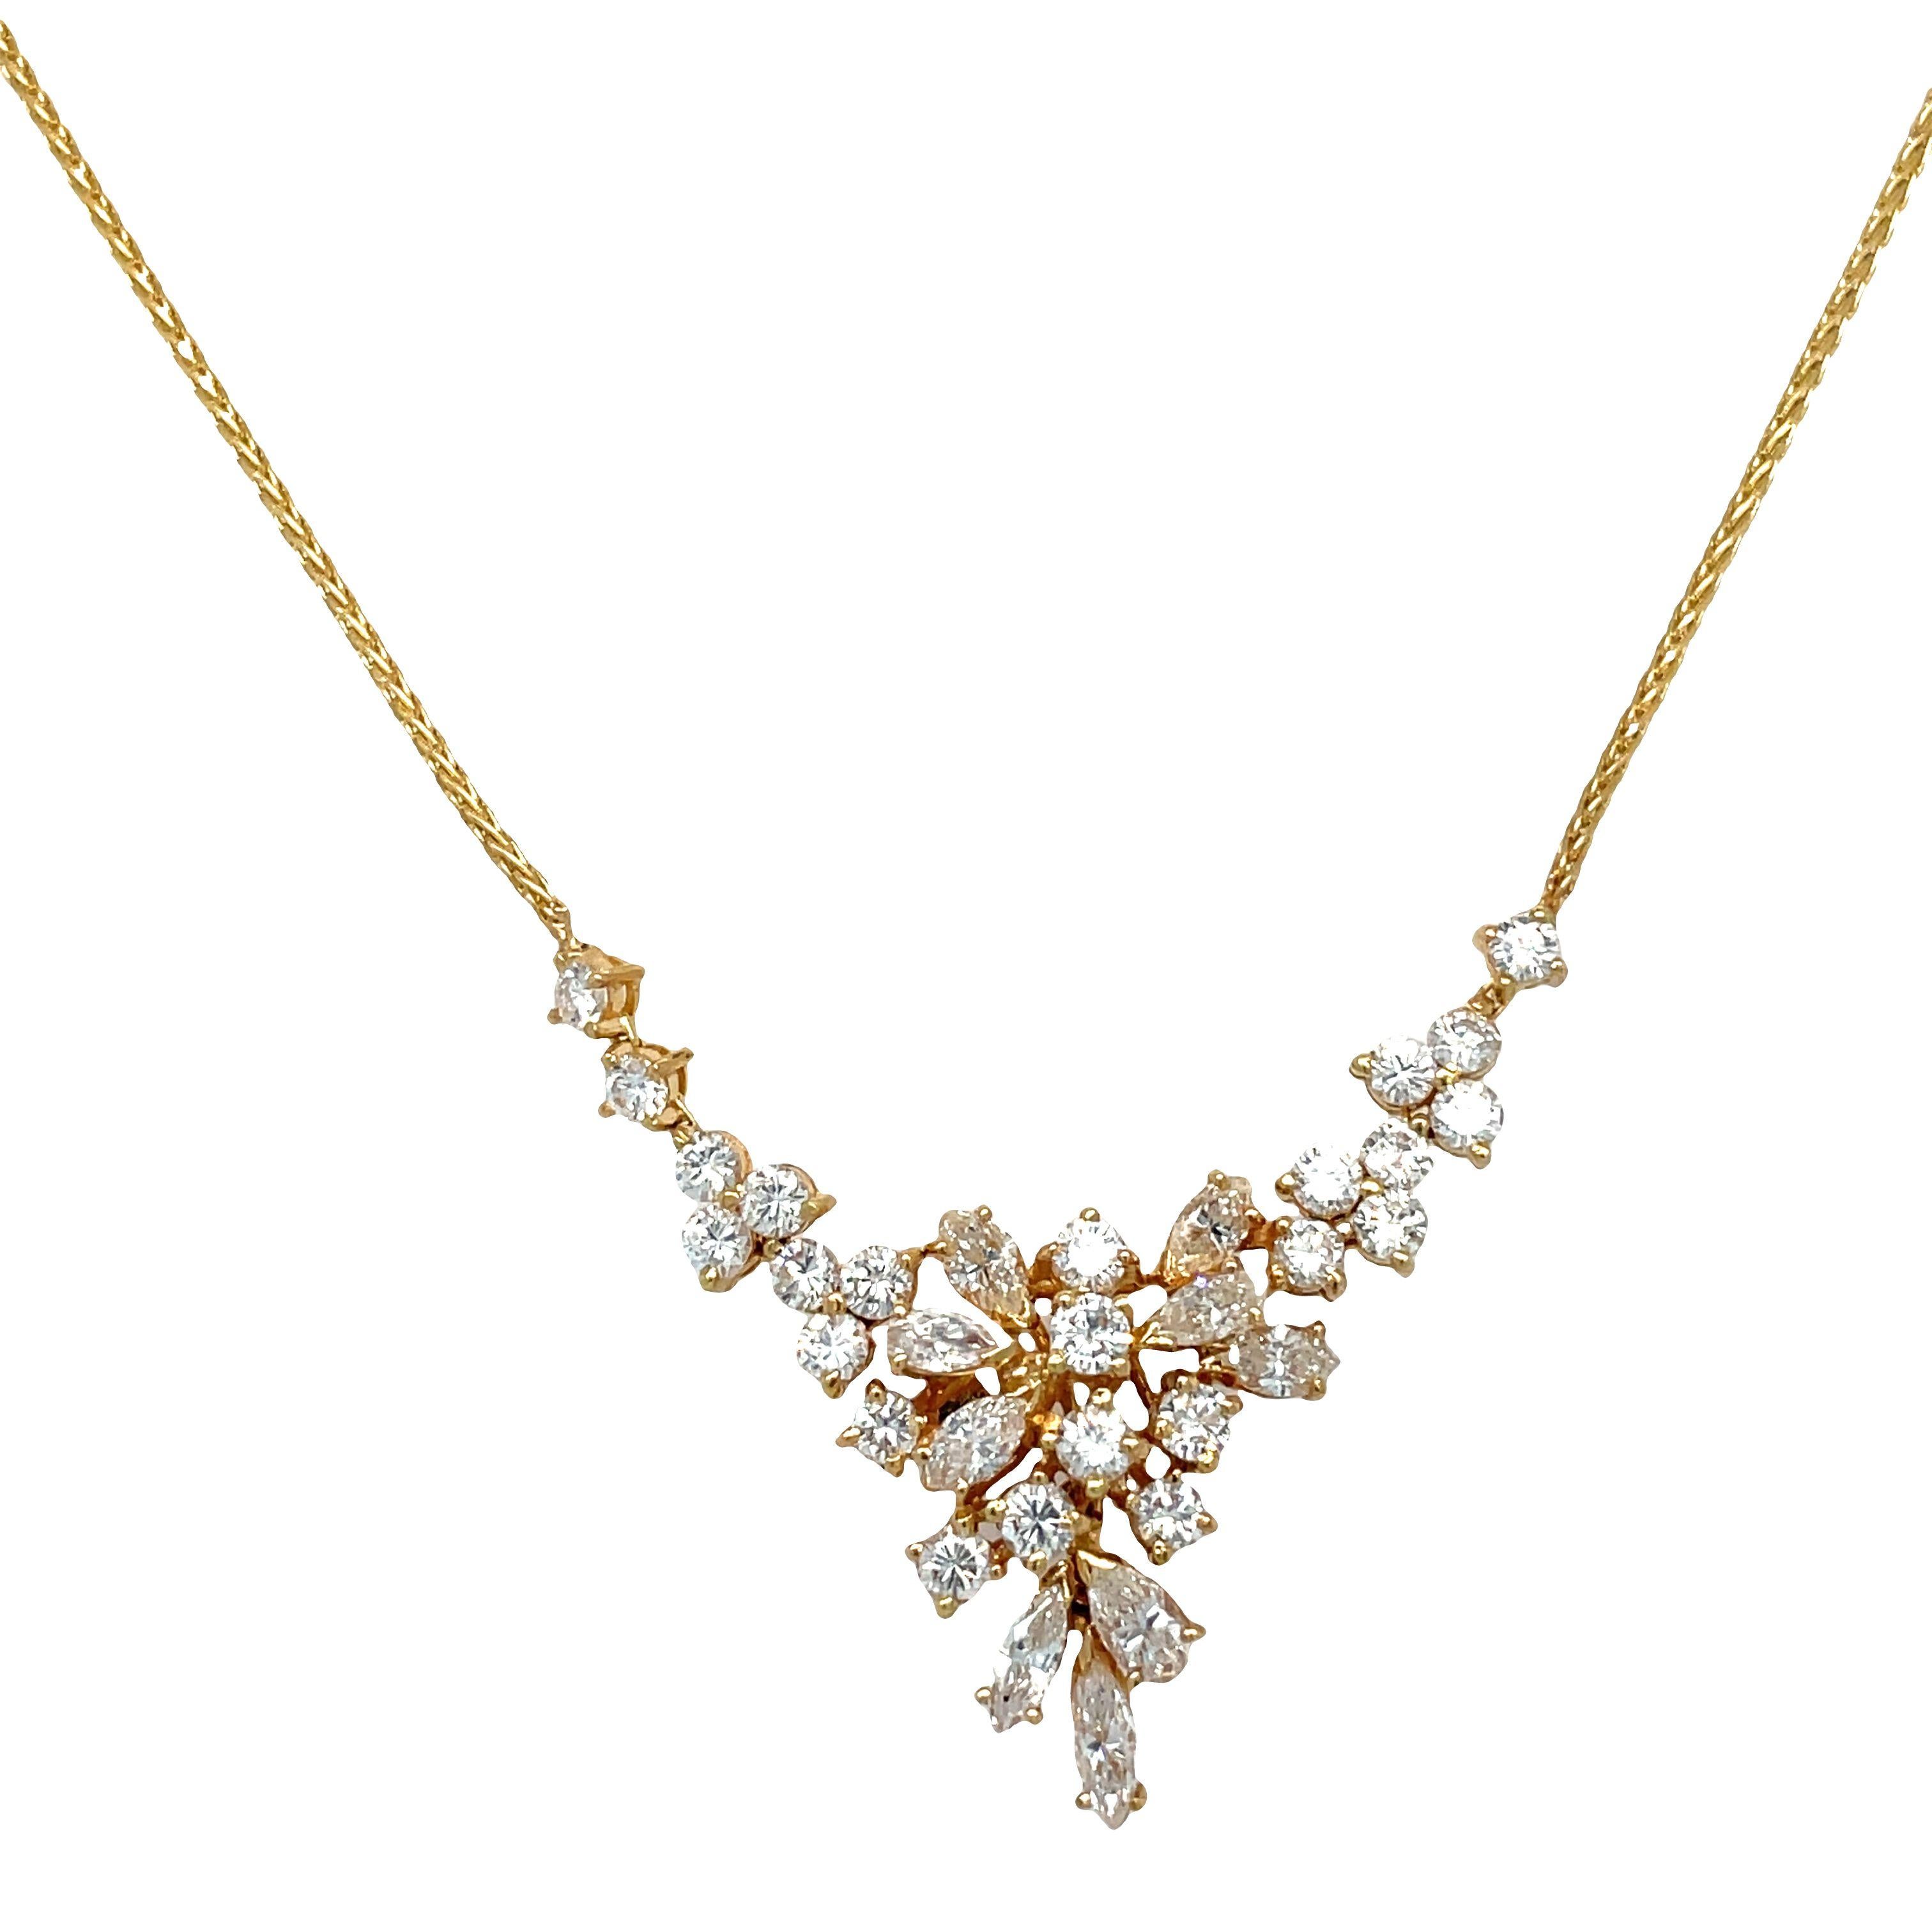 Introducing this exquisite diamond scatter statement necklace, designed to leave a lasting impression of elegance. Crafted in 18k yellow gold, this one-of-a-kind beauty features a dazzling array of radiant 3.50 carats diamonds that appear to